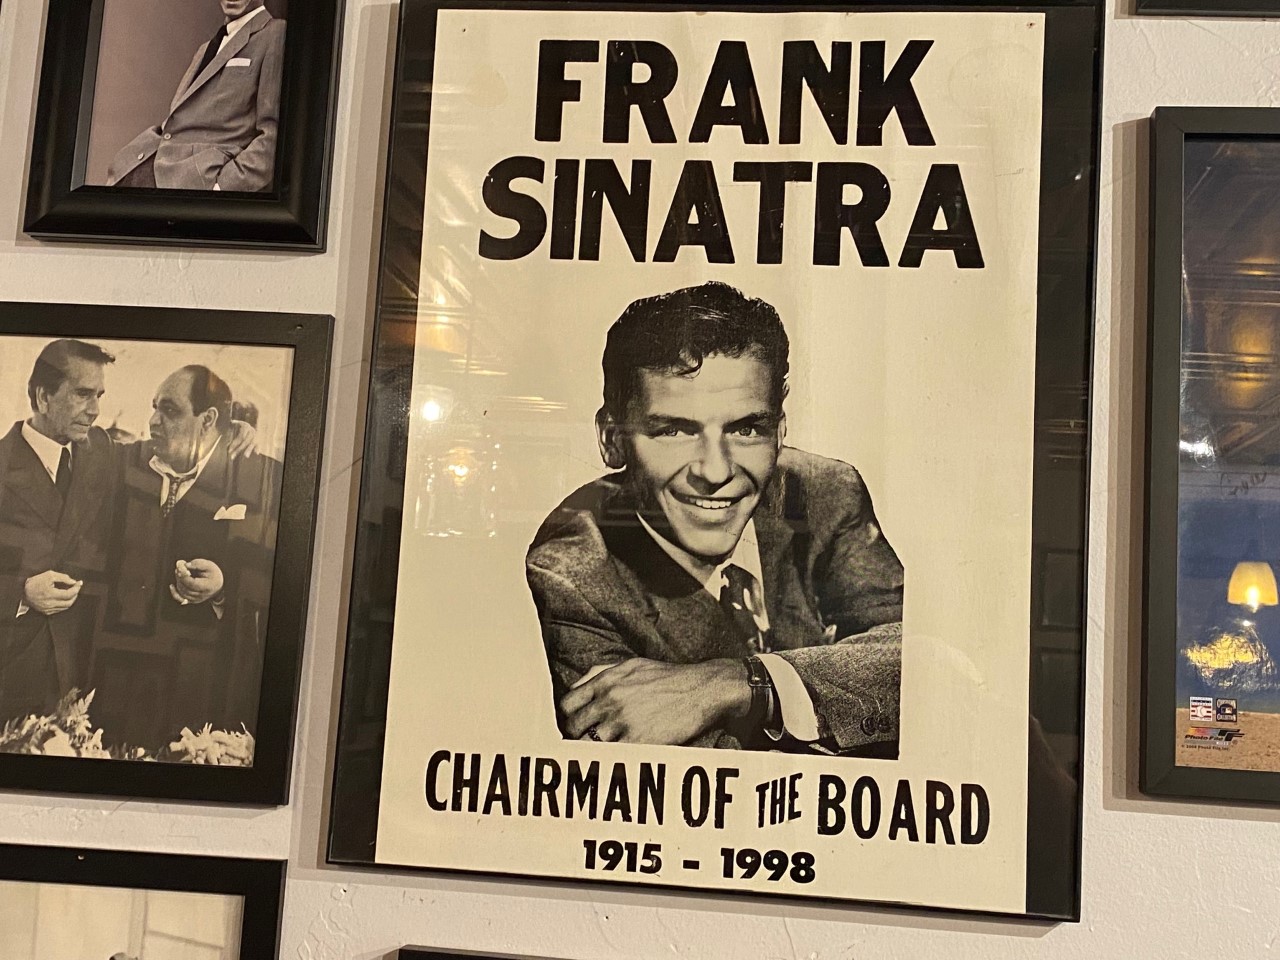 Pictures of Frank Sinatra on the walls at Paravicini’s Italian Bistro